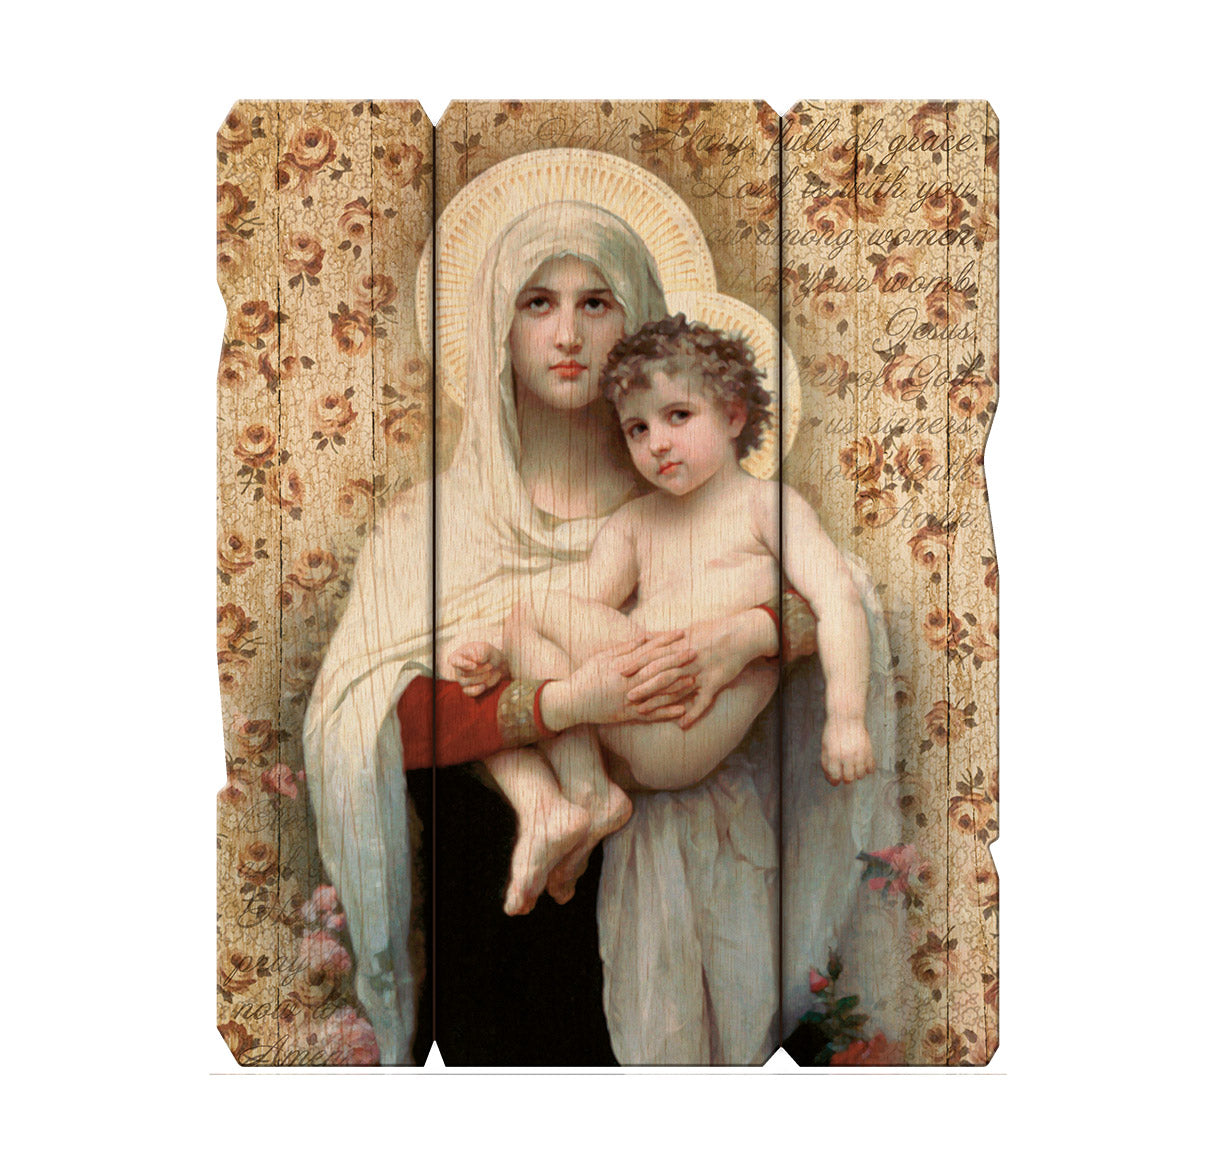 Madonna and Child Wood Wall Plaque